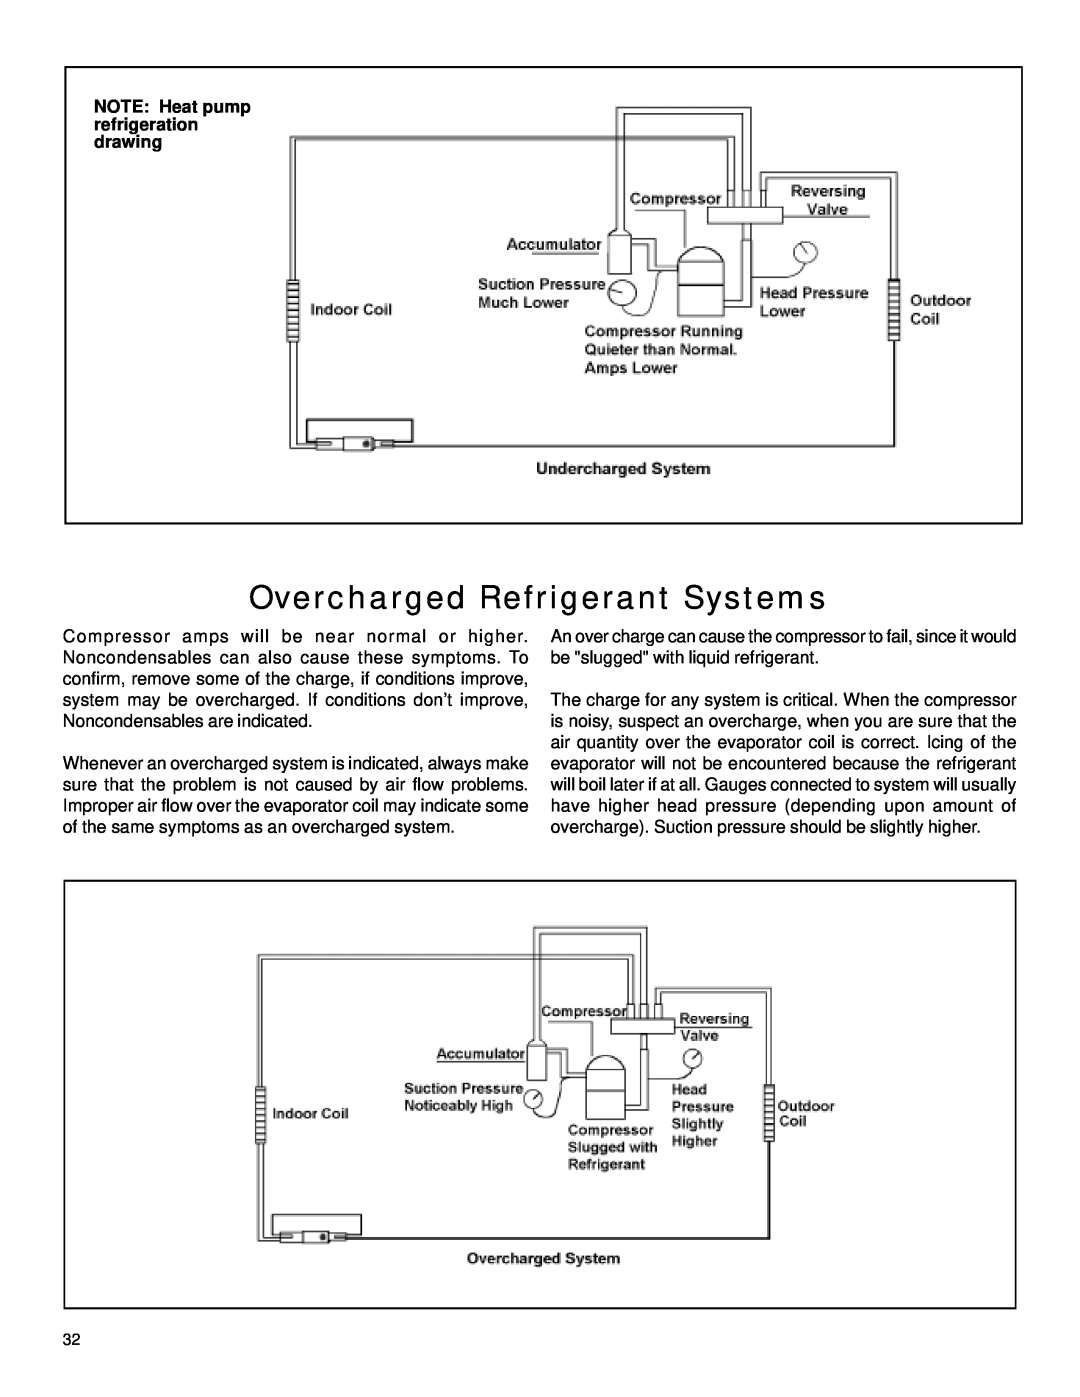 Friedrich racservmn service manual Overcharged Refrigerant Systems, NOTE: Heat pump refrigeration drawing 